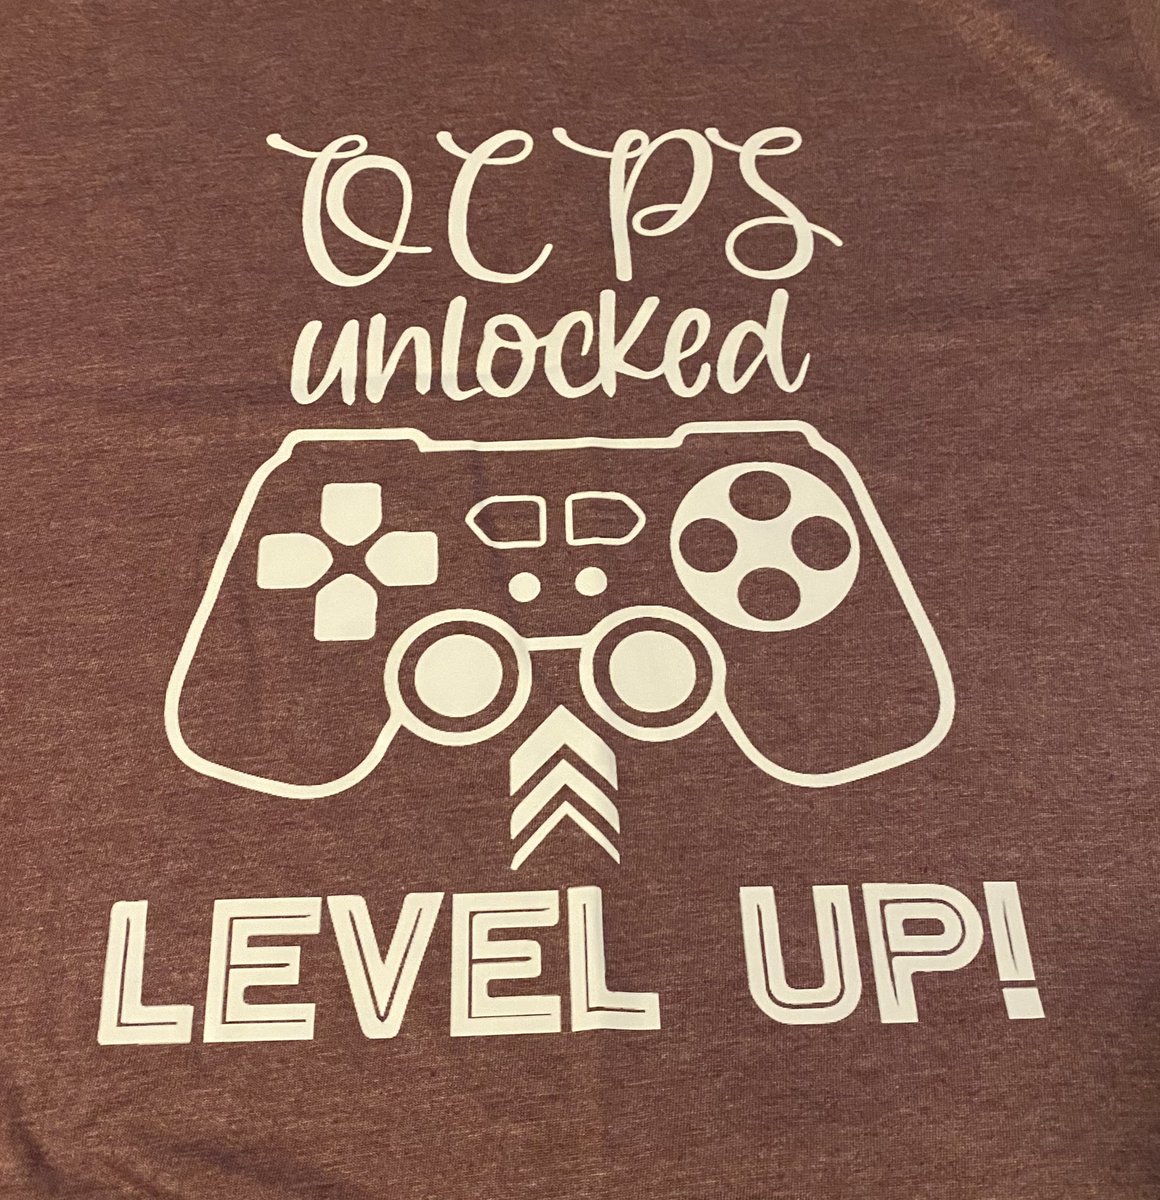 Rock Your School is coming! 10/21/22 Is your school going to be a part of the experience??? tinyurl.com/OCPSRYS22 #ocpsRYS @CDLocps #leveluplearning